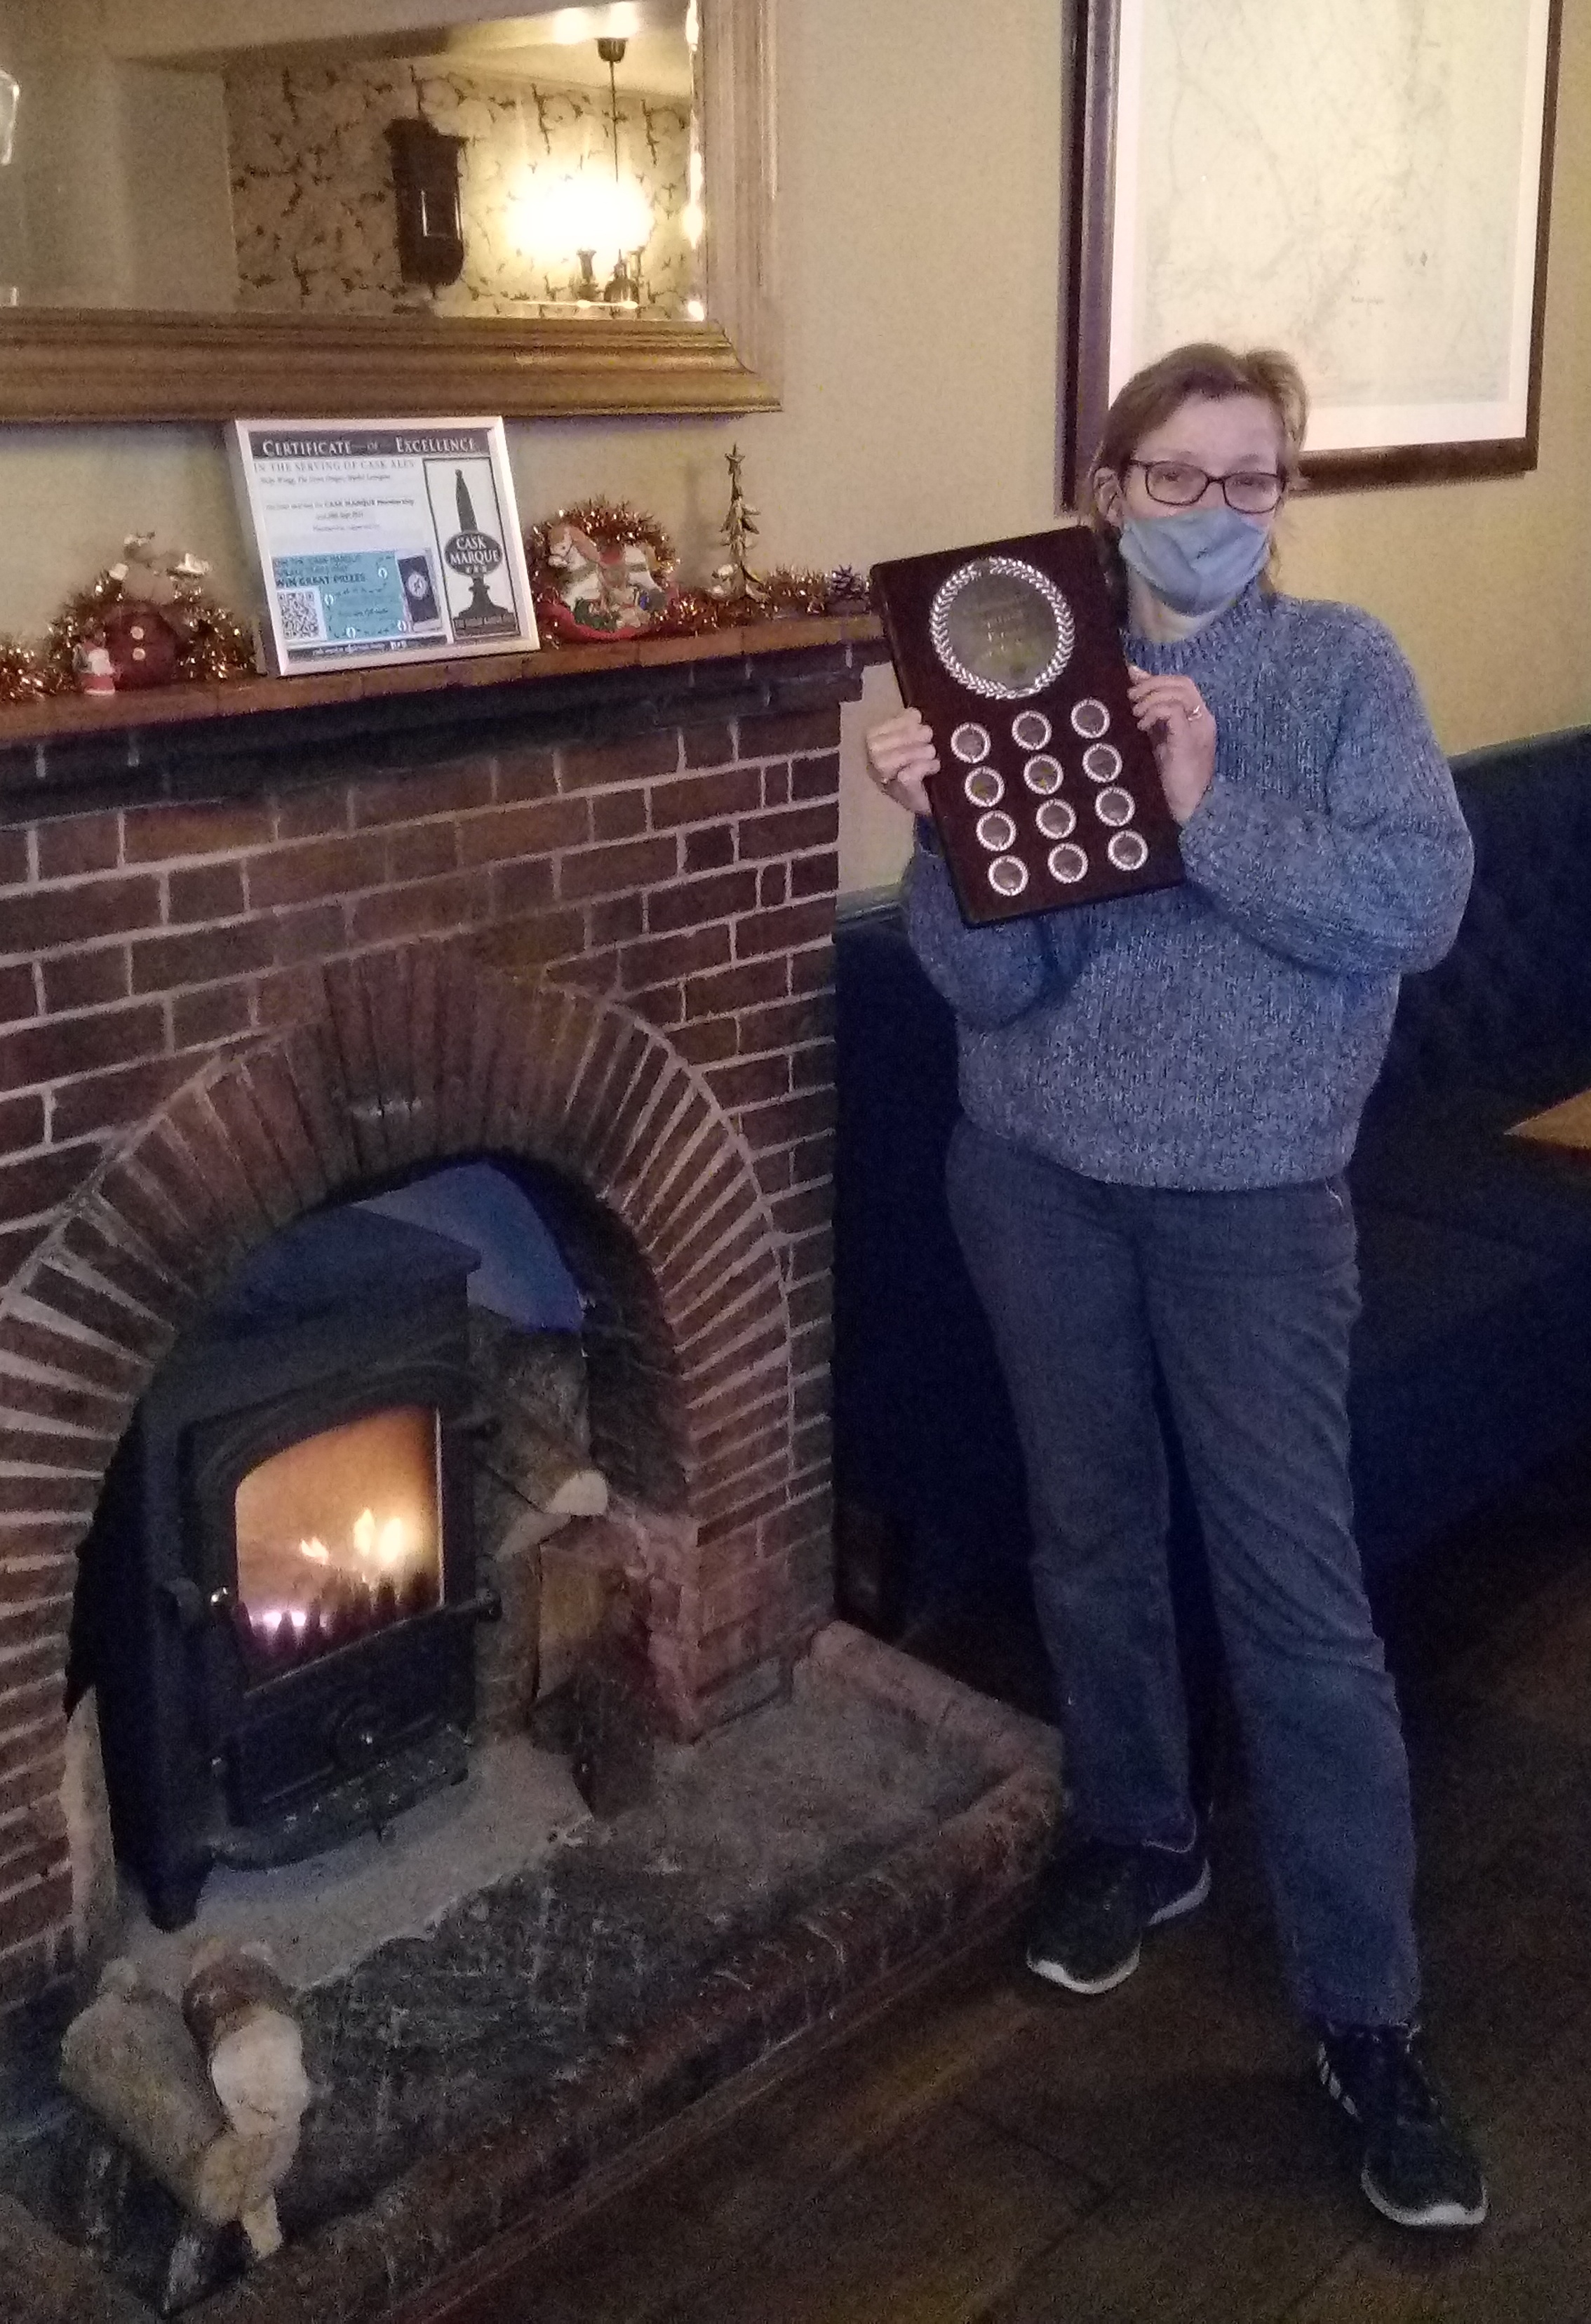 Image of Nicky holding an award shield in front of fireplace